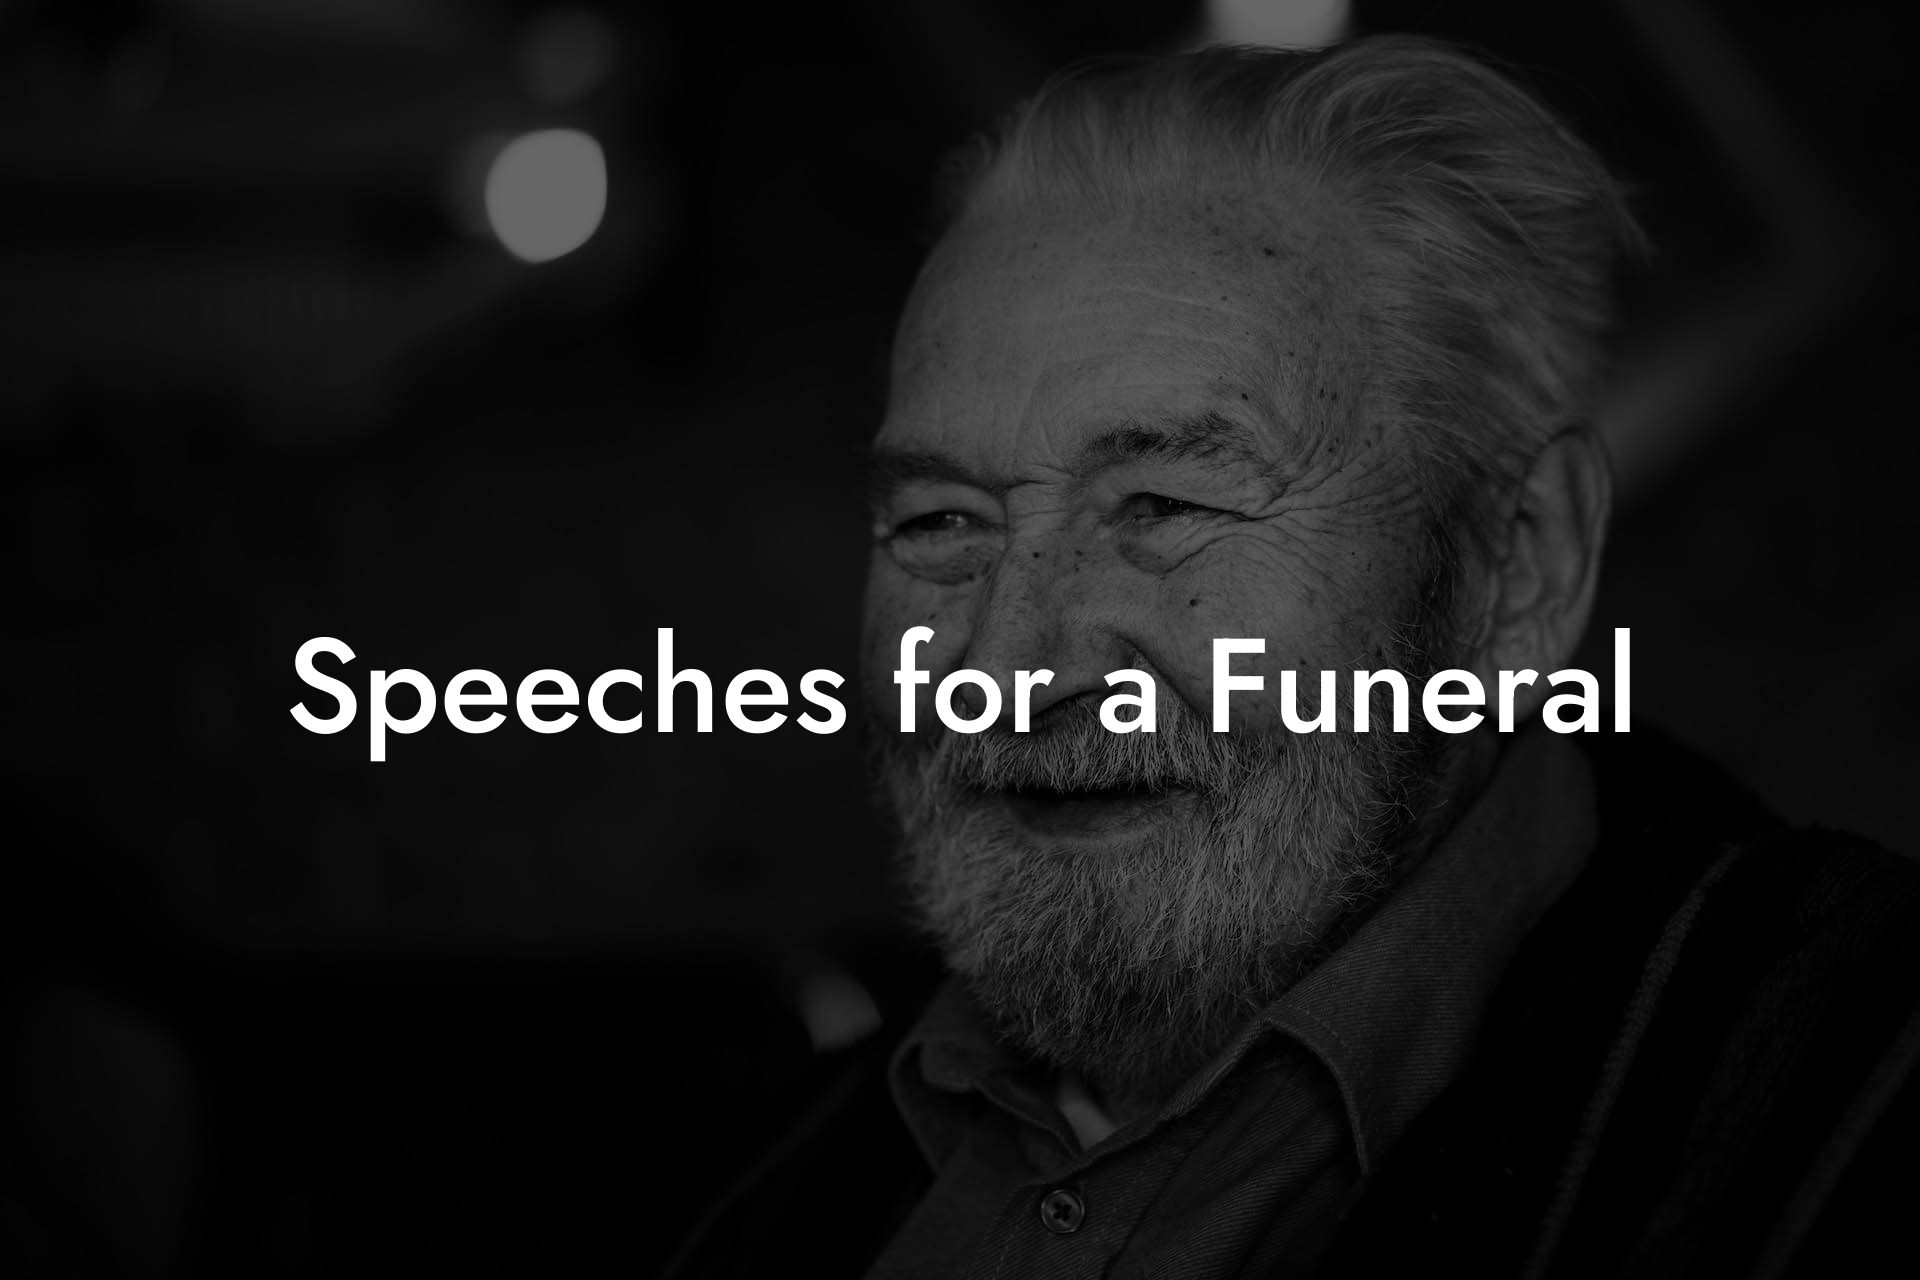 Speeches for a Funeral